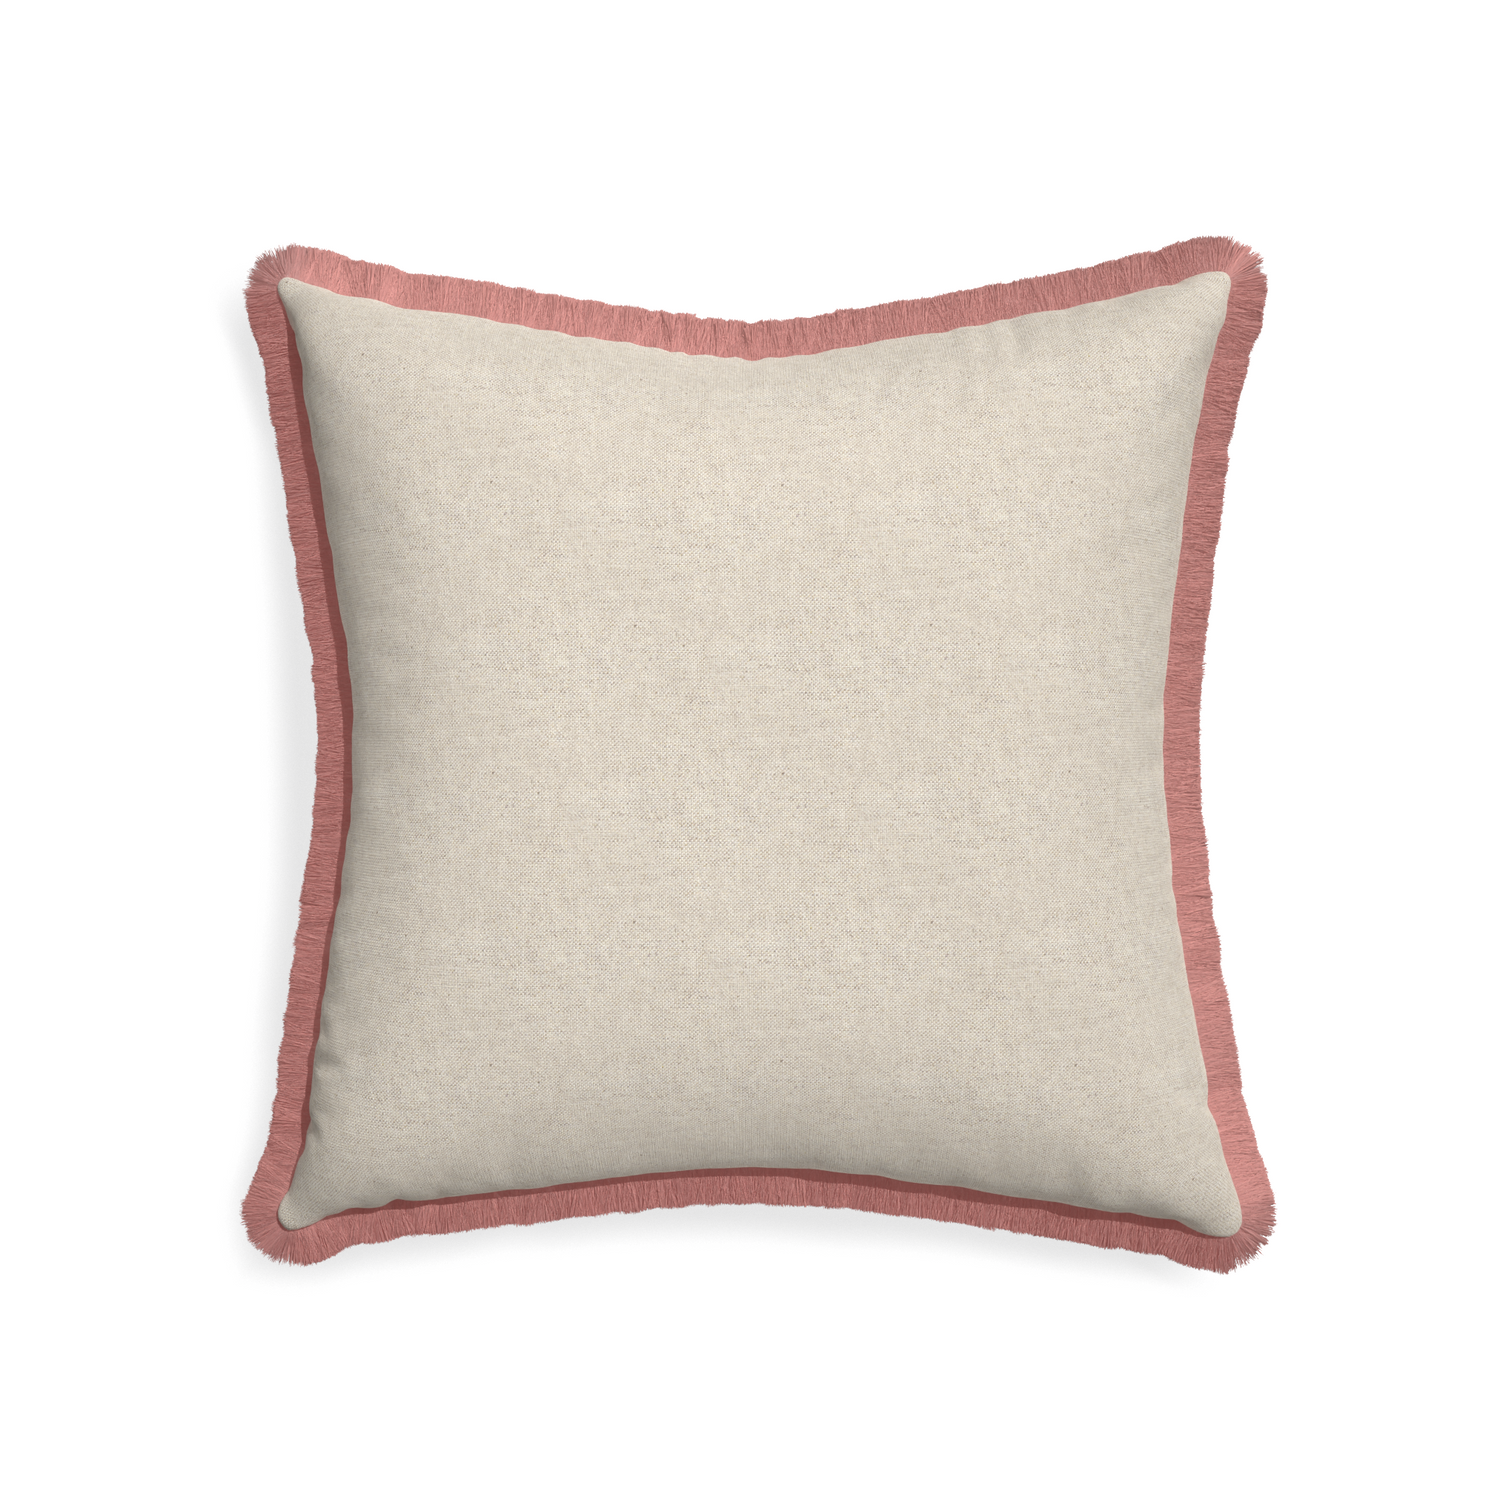 22-square oat custom light brownpillow with d fringe on white background